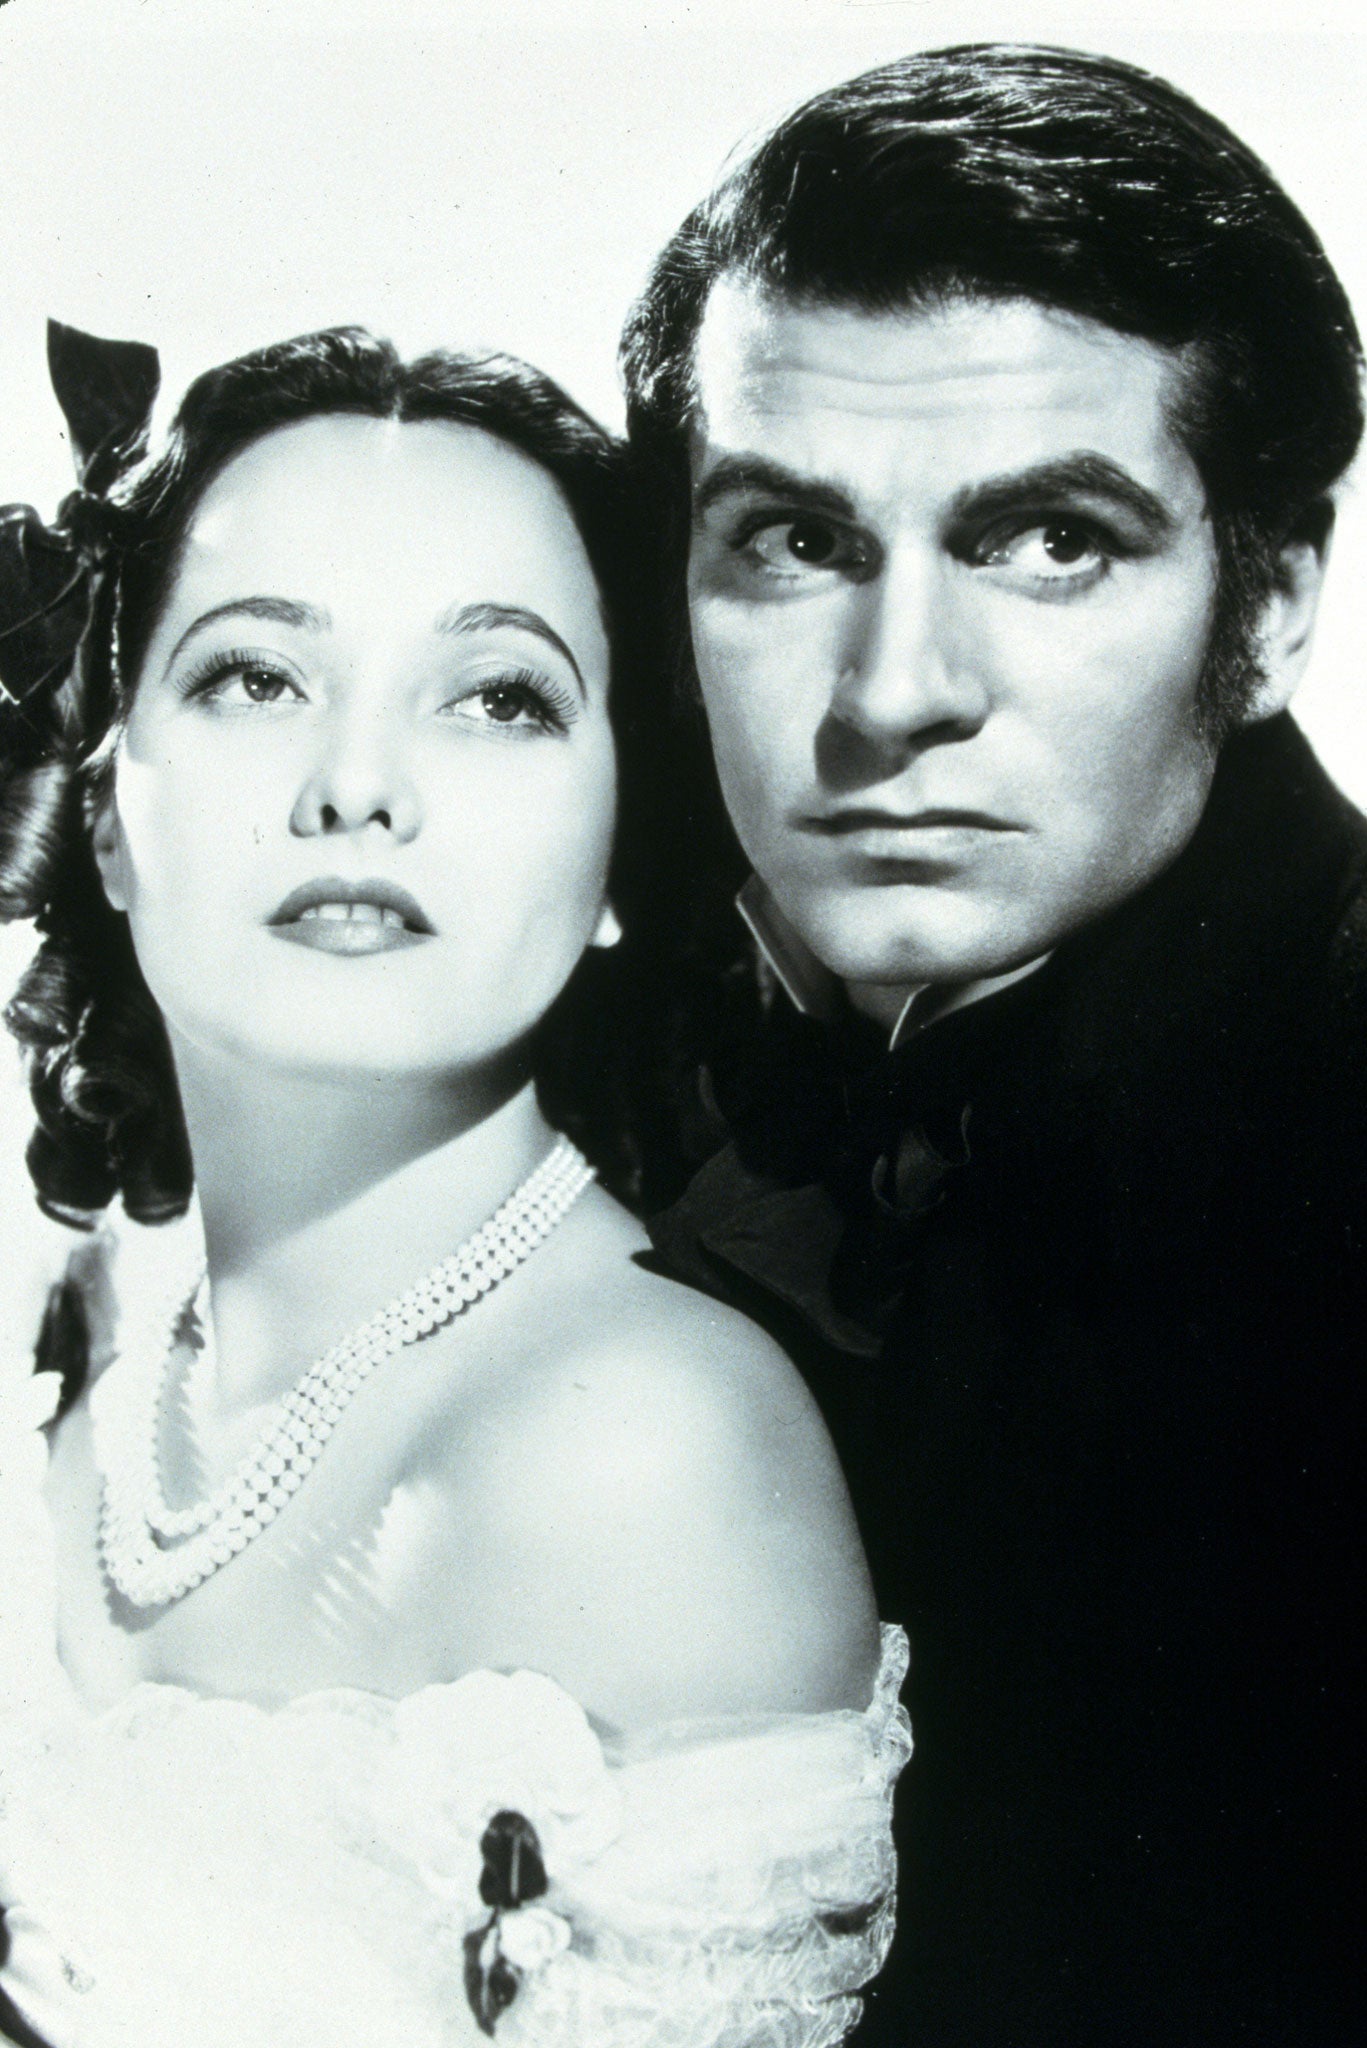 A film adaptation of Wuthering Heights, starring Laurence Olivier and Merle Oberon